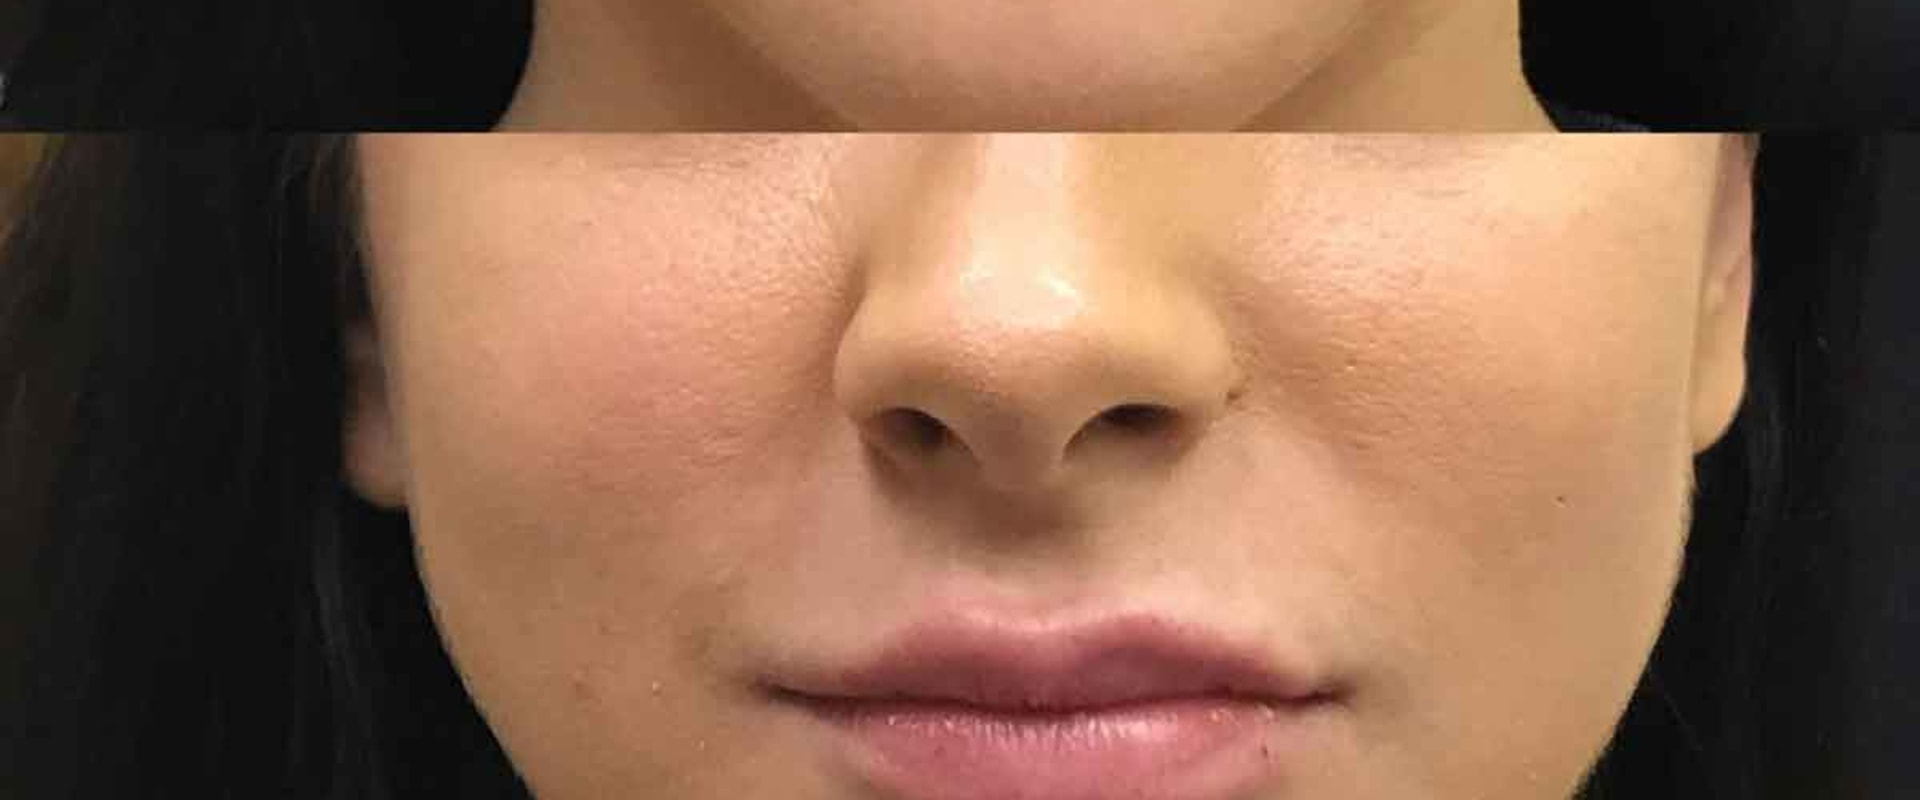 What Age is Appropriate for Restylane Injections?